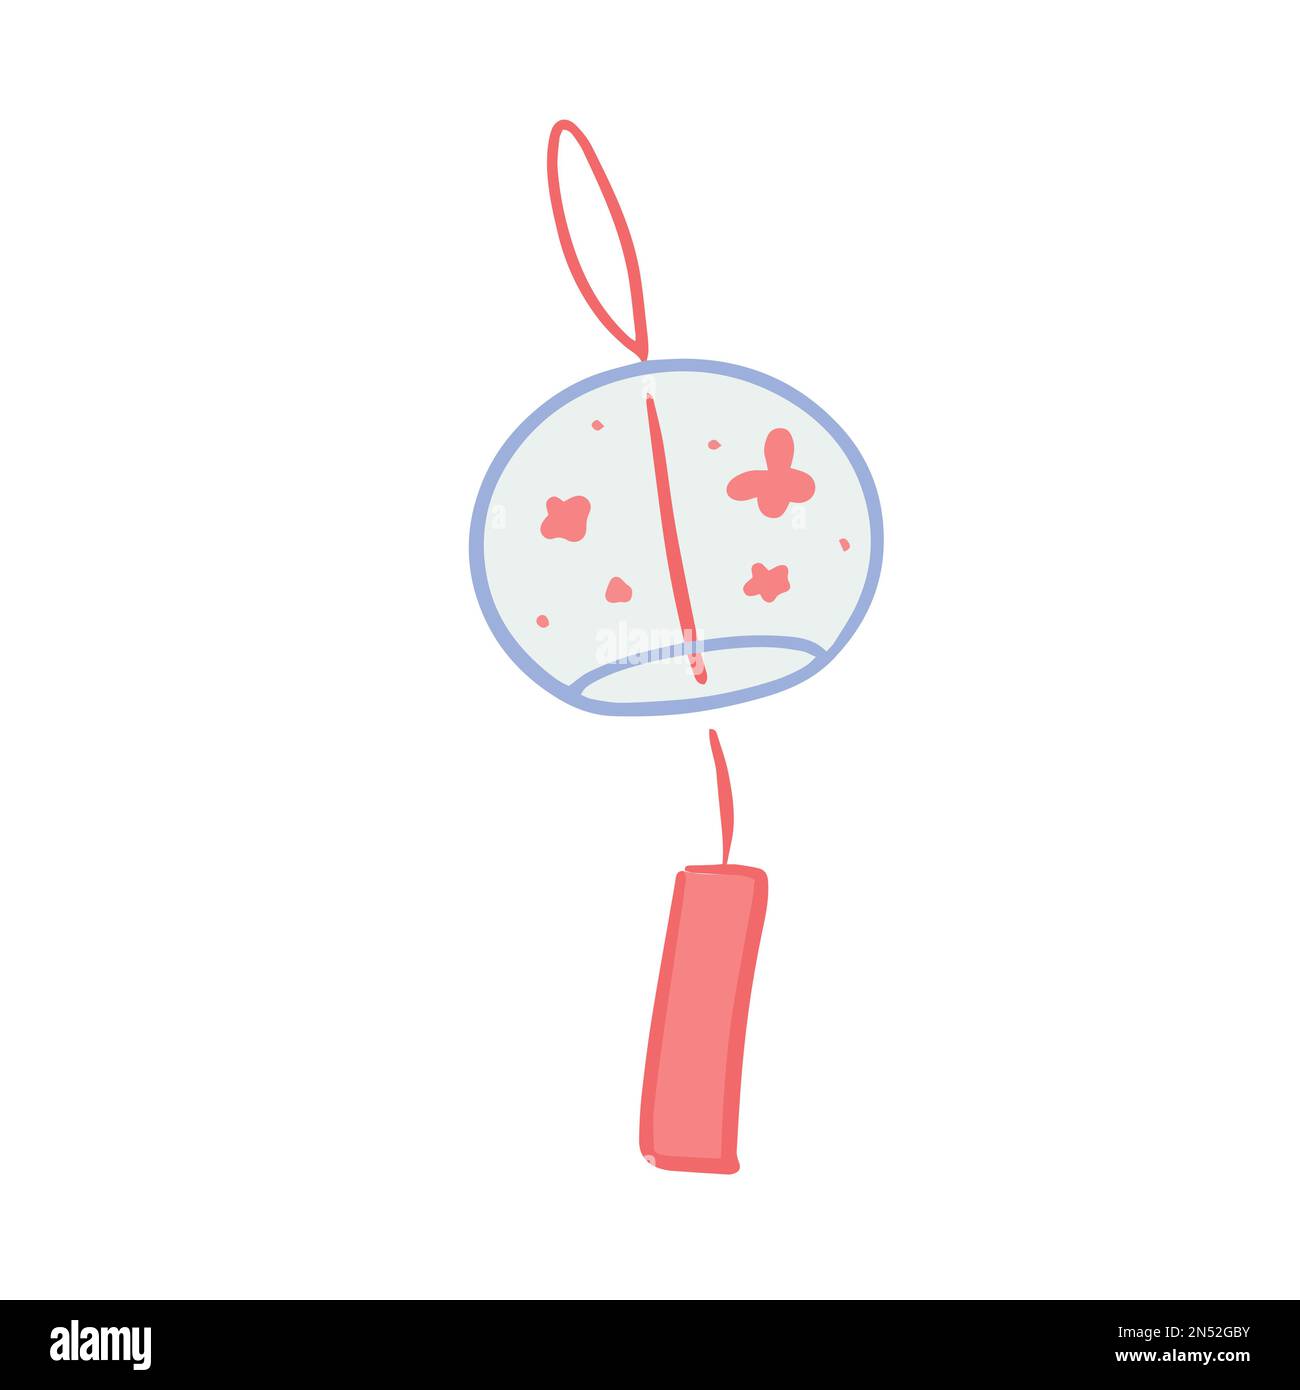 Hand drawn cute glass furin artwork, Japanese traditional wind chime ...